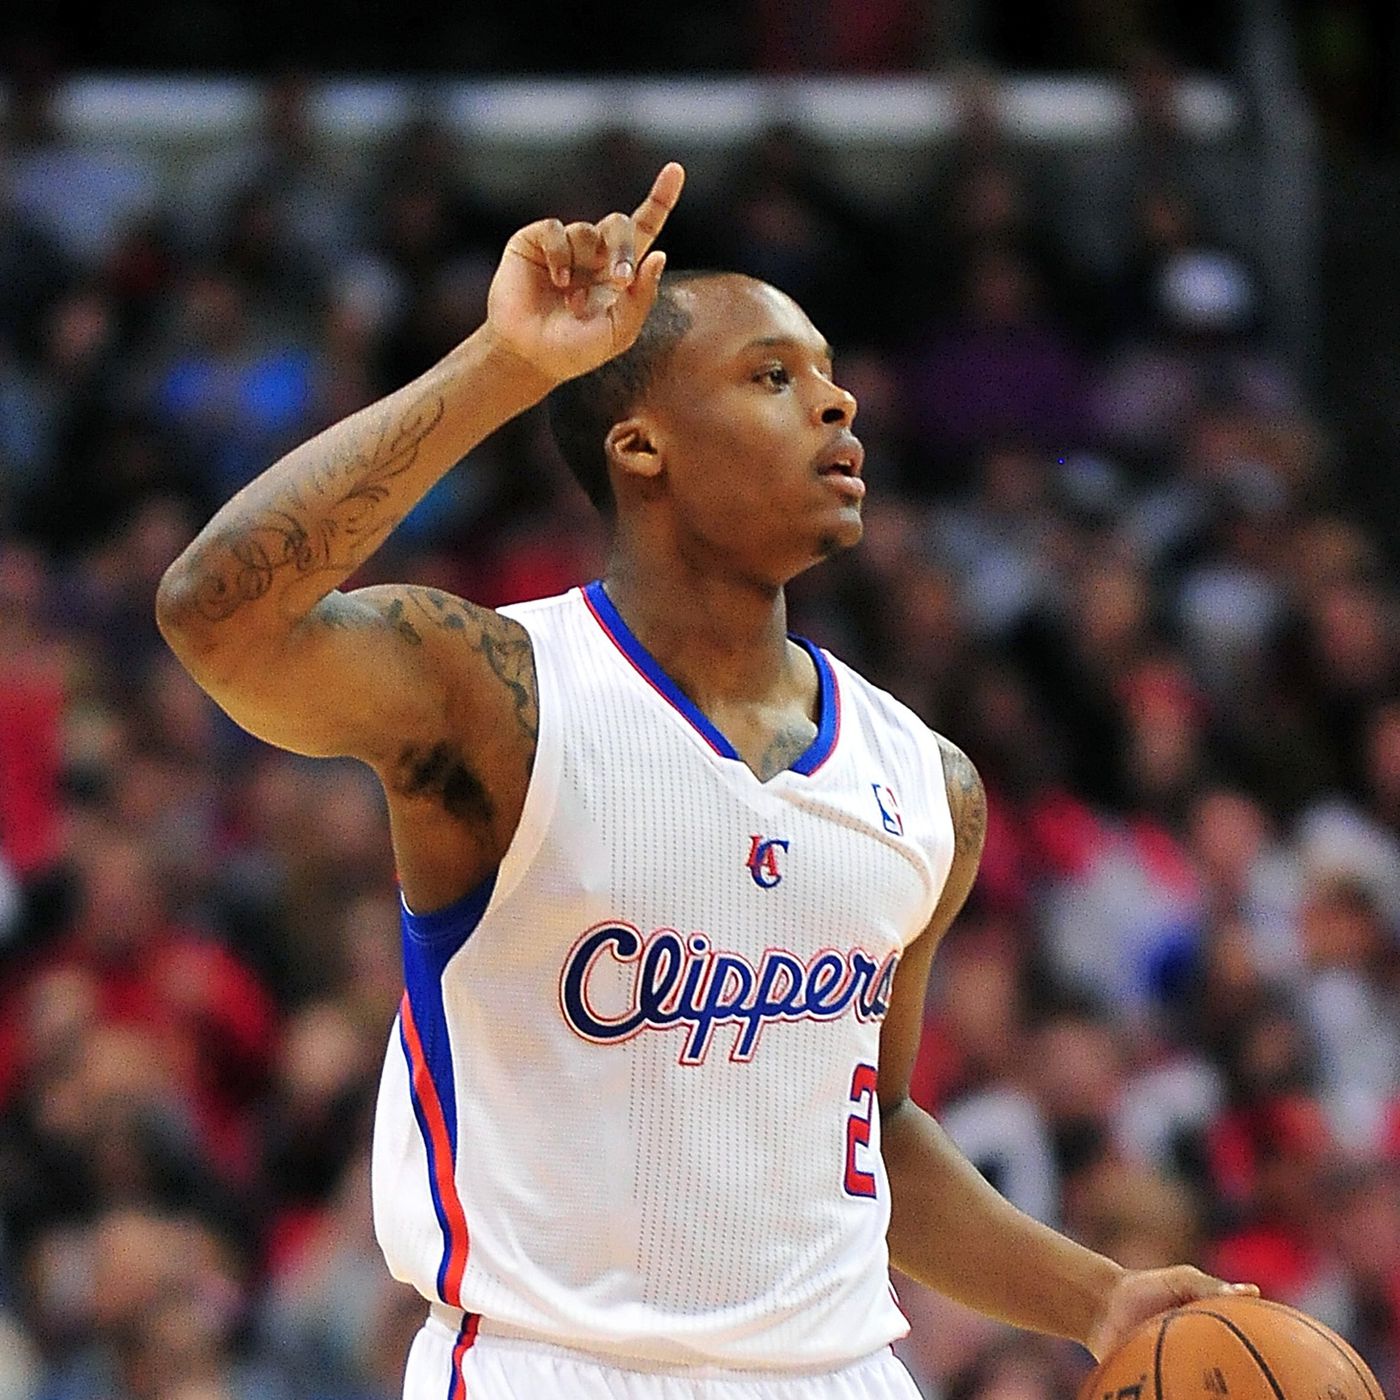 Maalik Wayns with Los Angeles Clippers (Source: clipsnation.com)